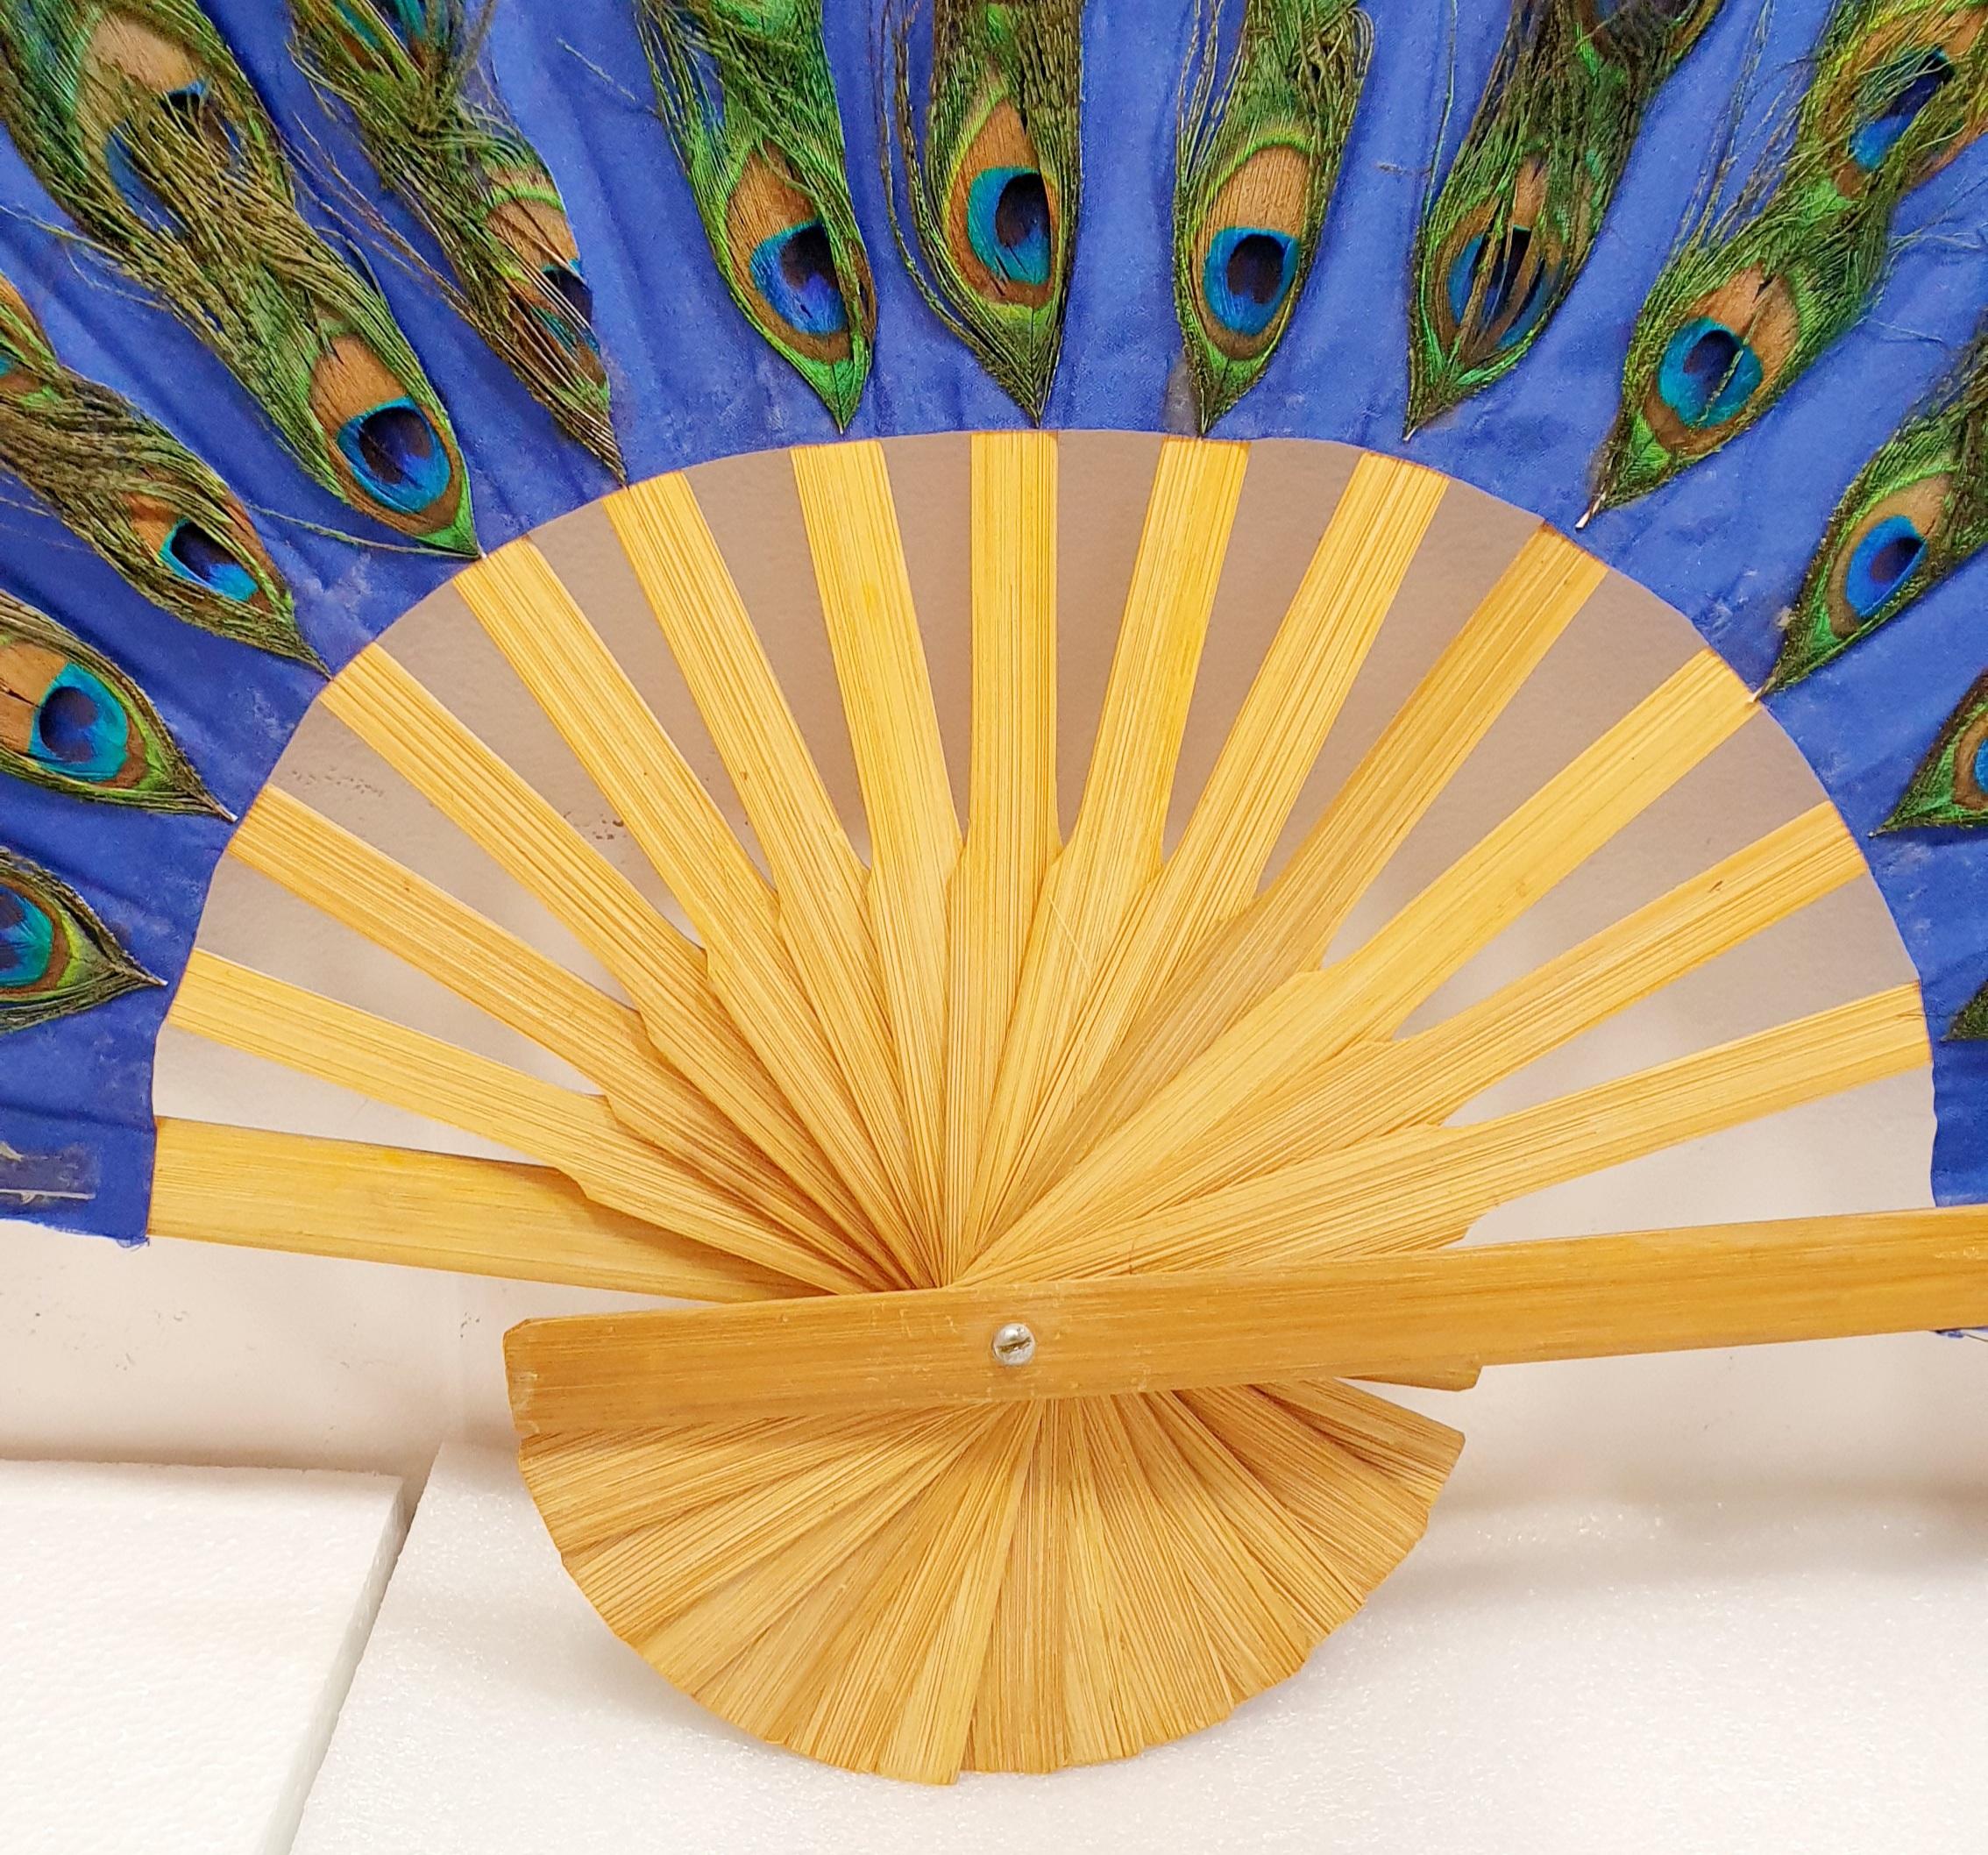  Peacok Feathers Fan in natural barnished pine wood   In Excellent Condition For Sale In  Bilbao, ES